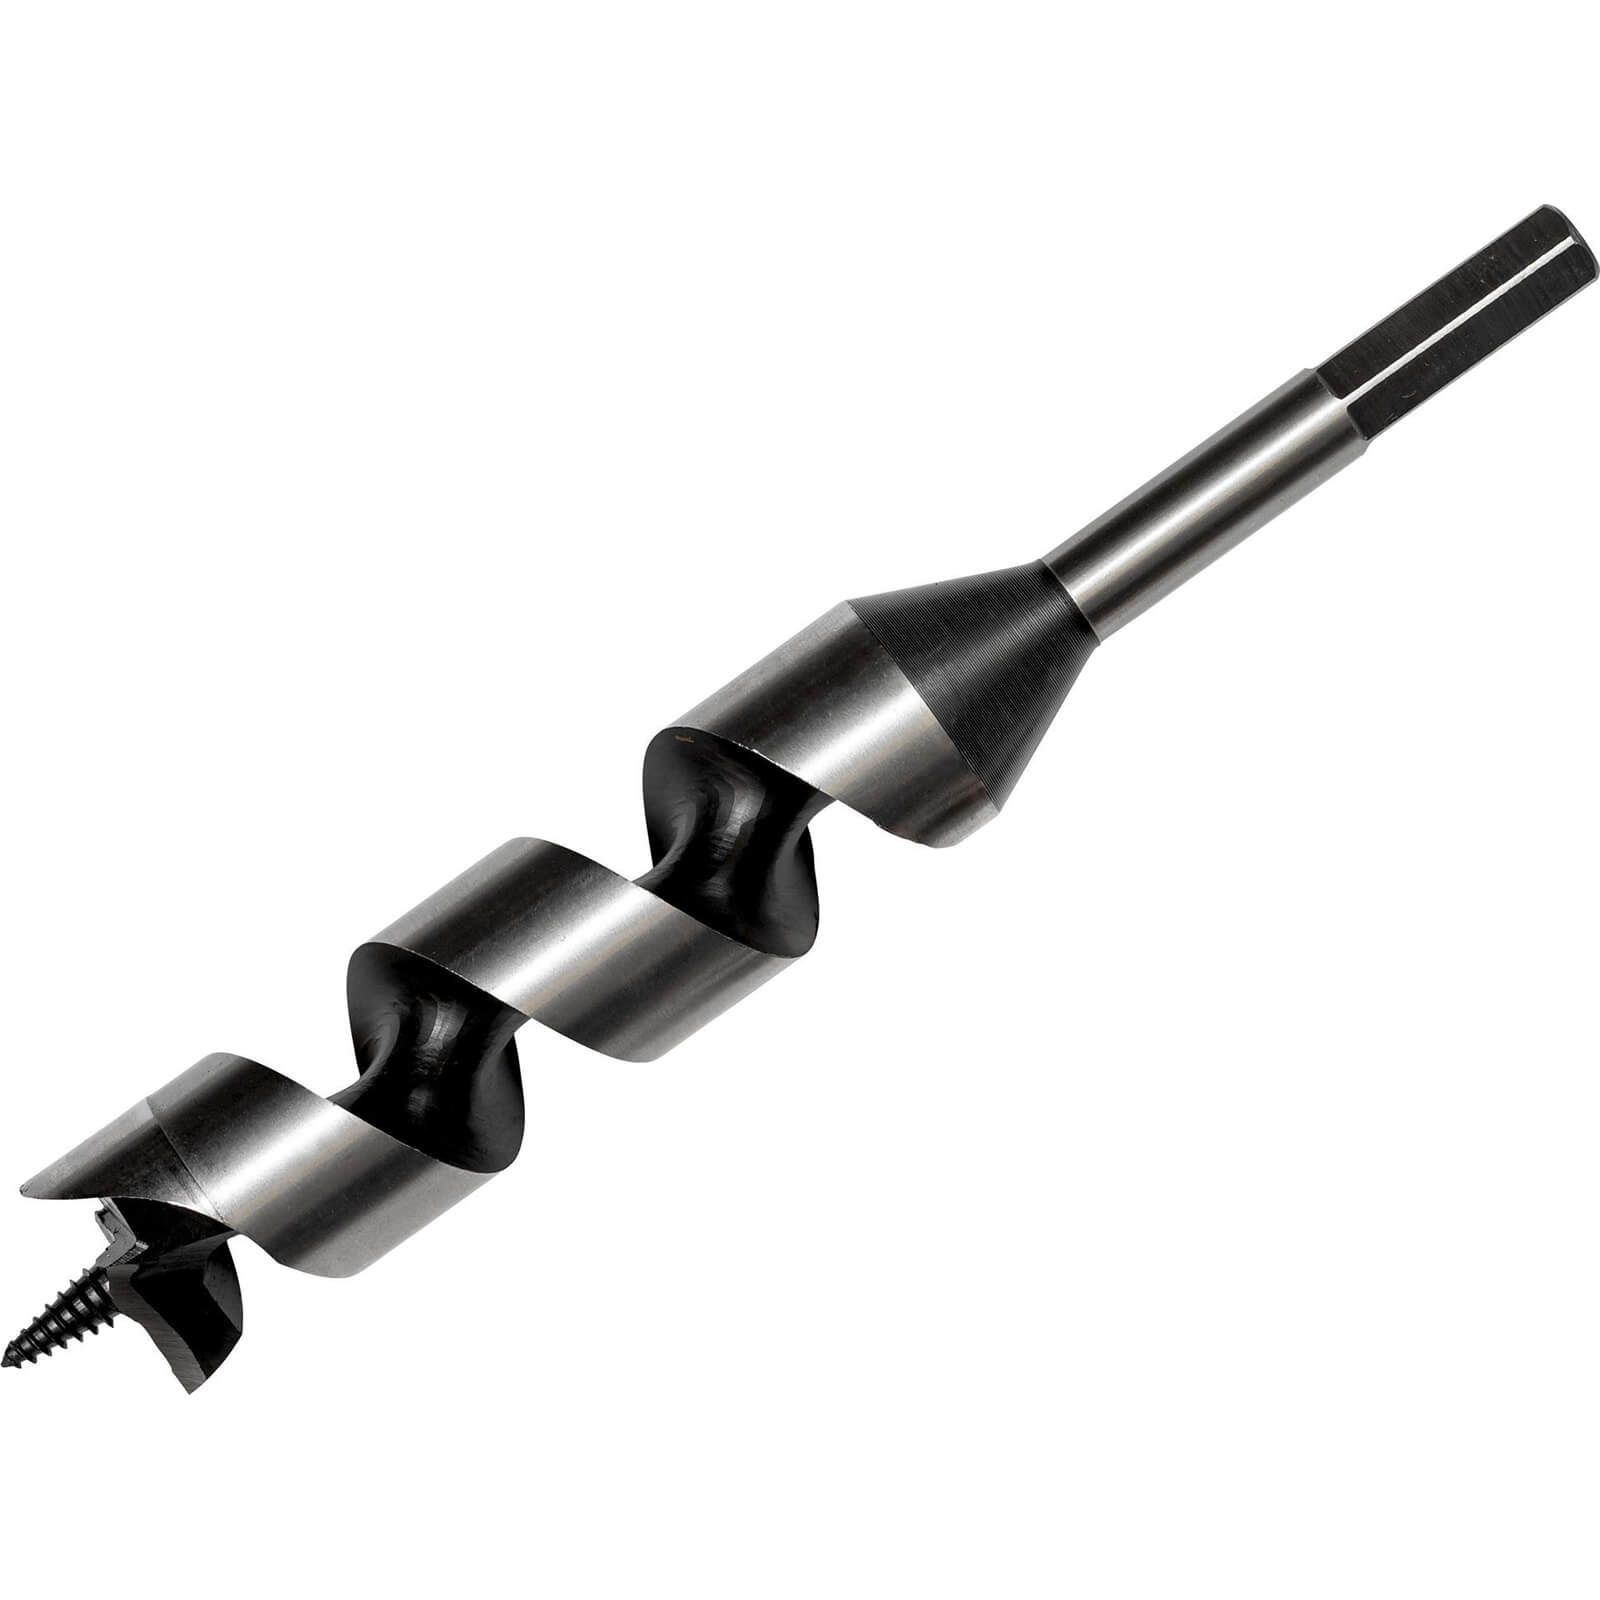 Photo of Bahco 9626 Series Combination Auger Drill Bit 10mm 230mm